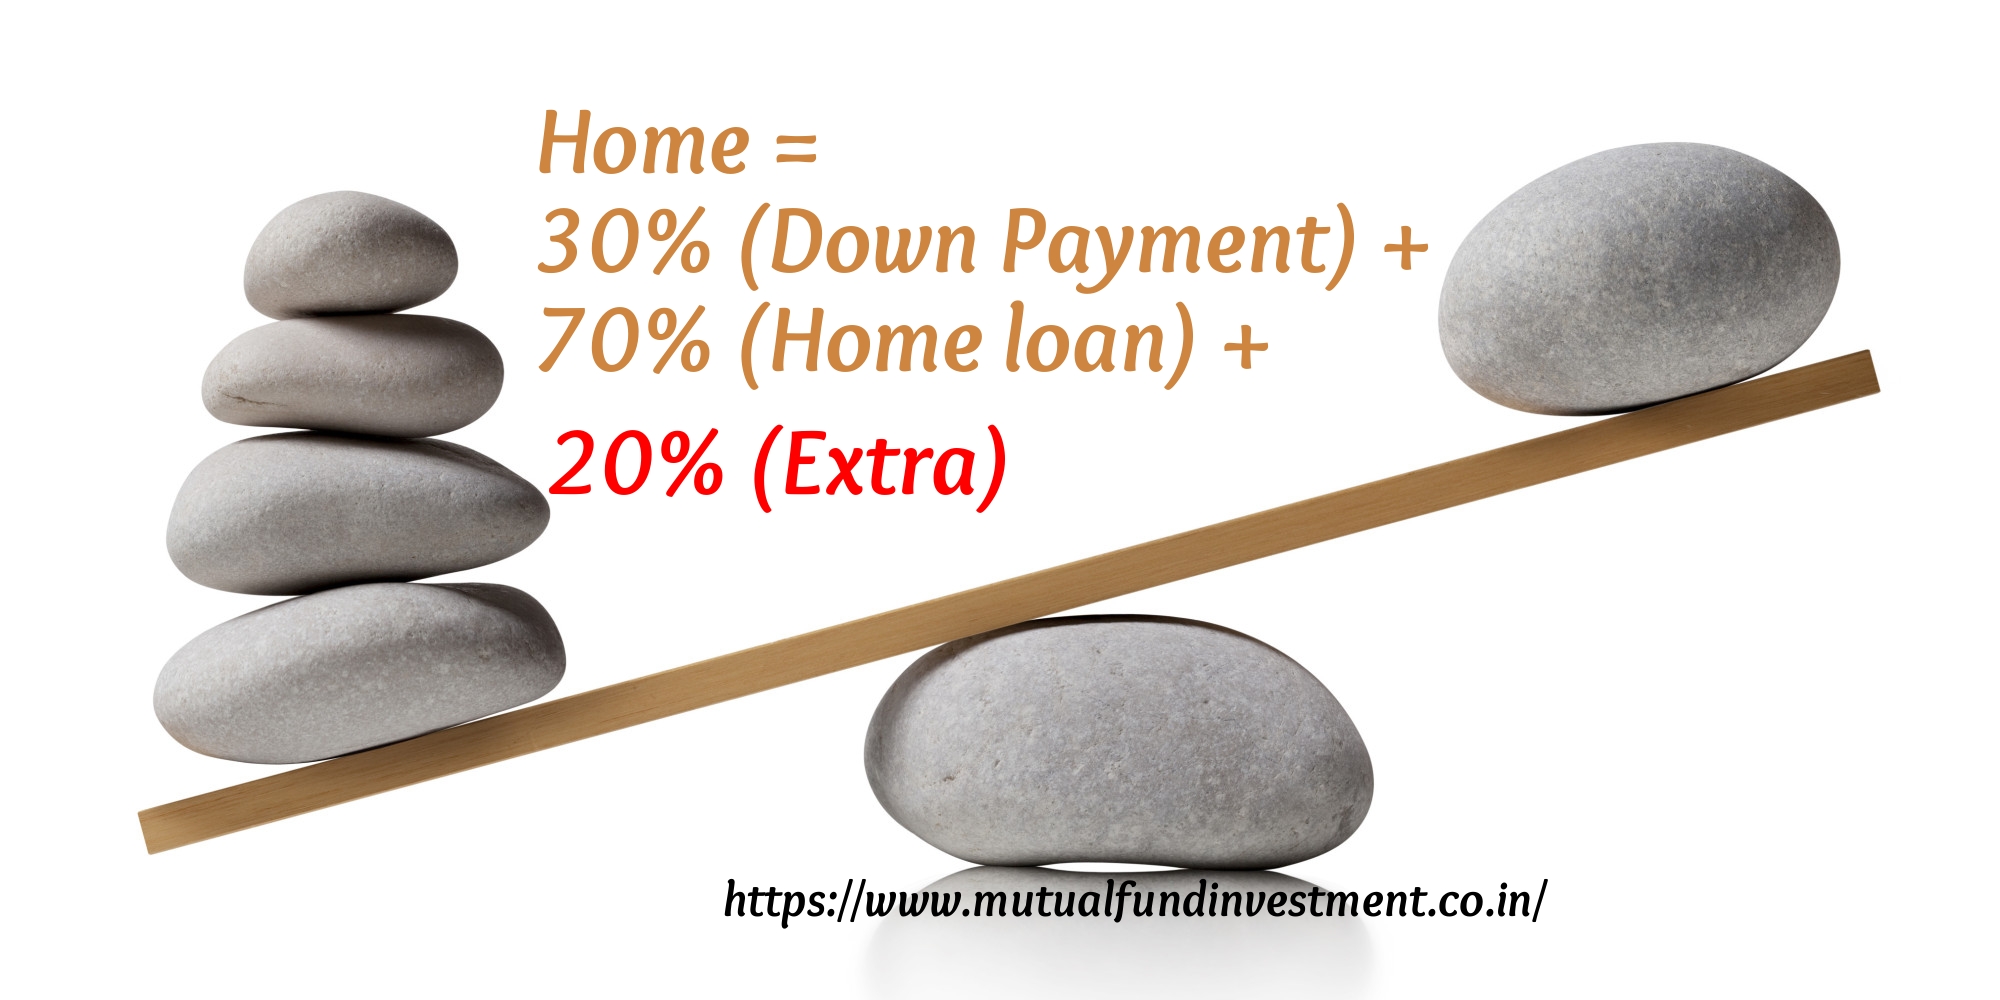 home loan 20% extra